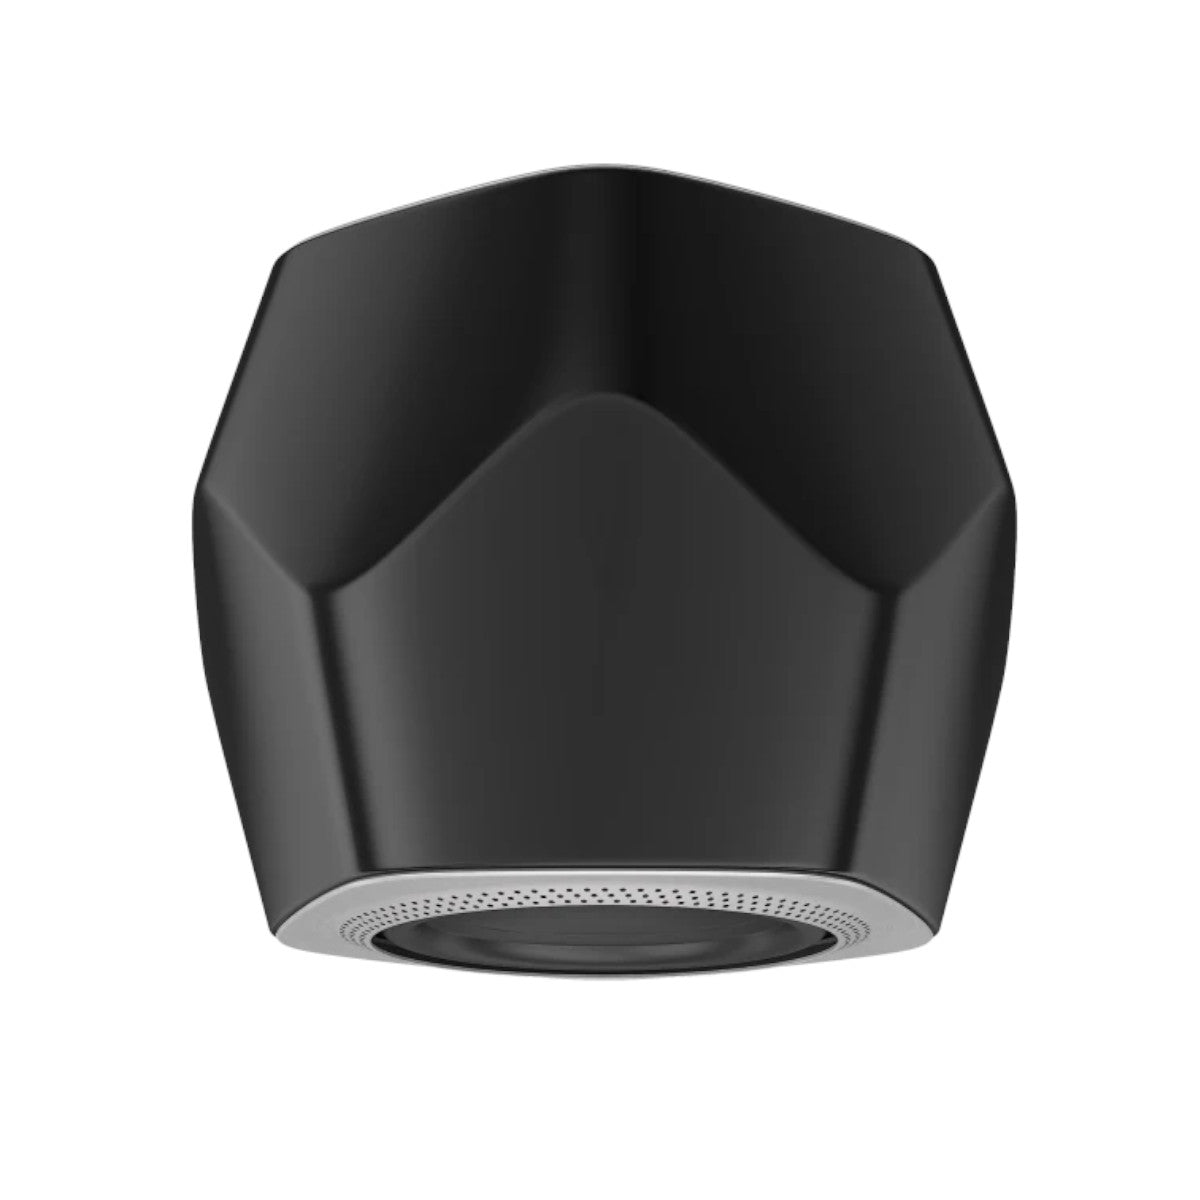 Bang & Olufsen BeoLab 19 Wireless Subwoofer